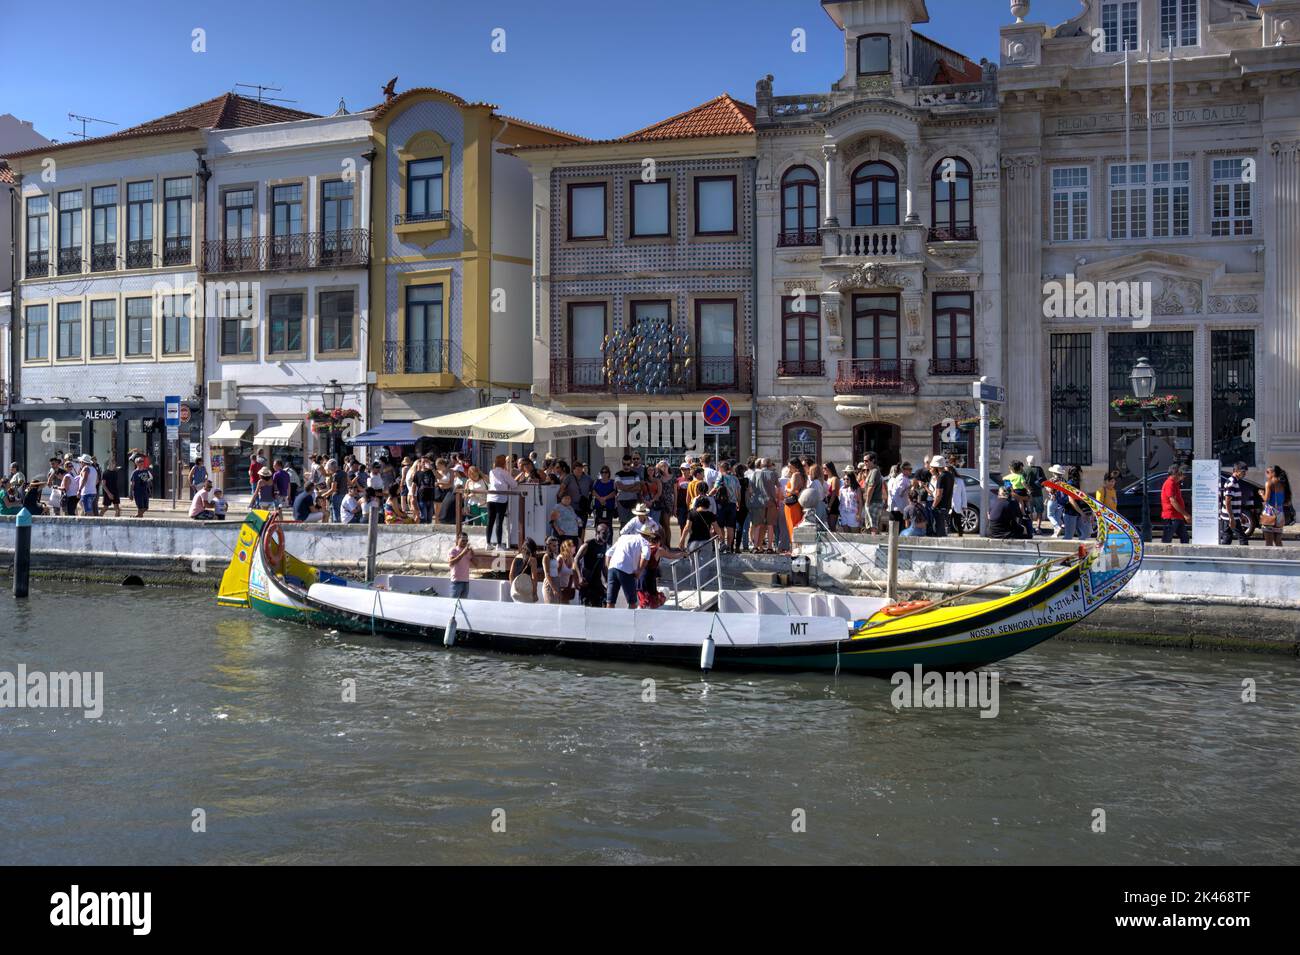 Aveiro, Portugal - August 14, 2022: Tourists disembarking from and queuing to embark a moored gondola with colonial style buildings in background Stock Photo